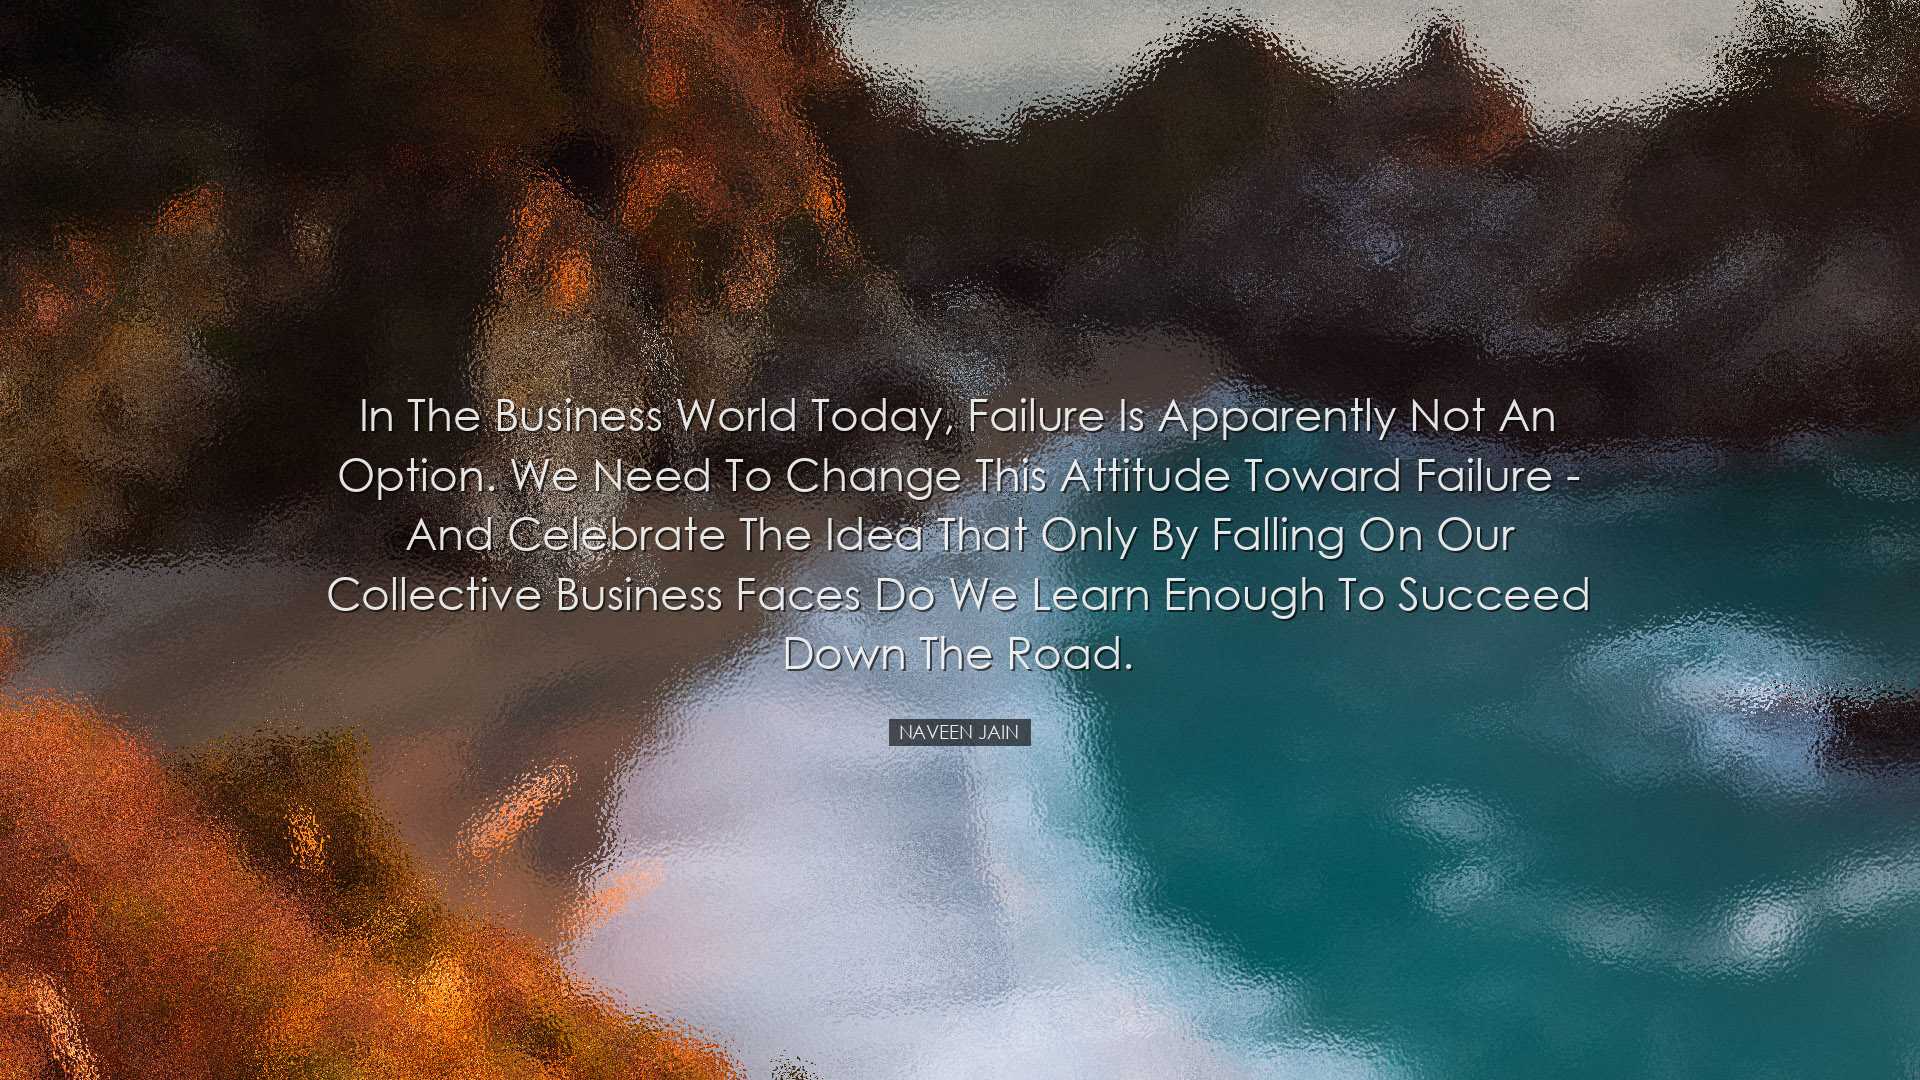 In the business world today, failure is apparently not an option.